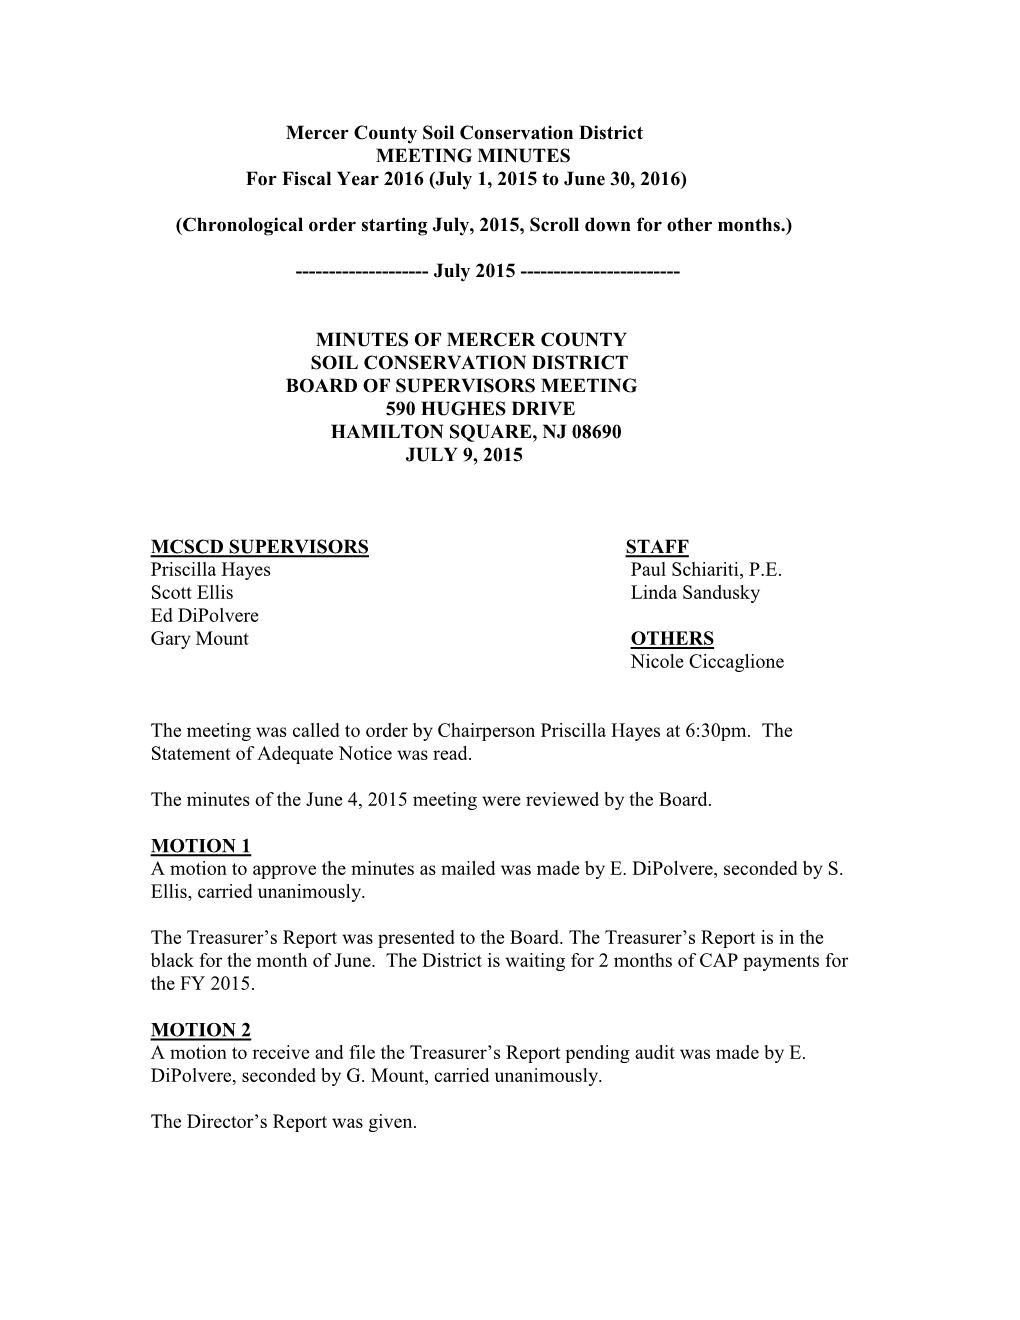 Minutes of Mercer County Soil Conservation District Board of Supervisors Meeting 590 Hughes Drive Hamilton Square, Nj 08690 July 9, 2015